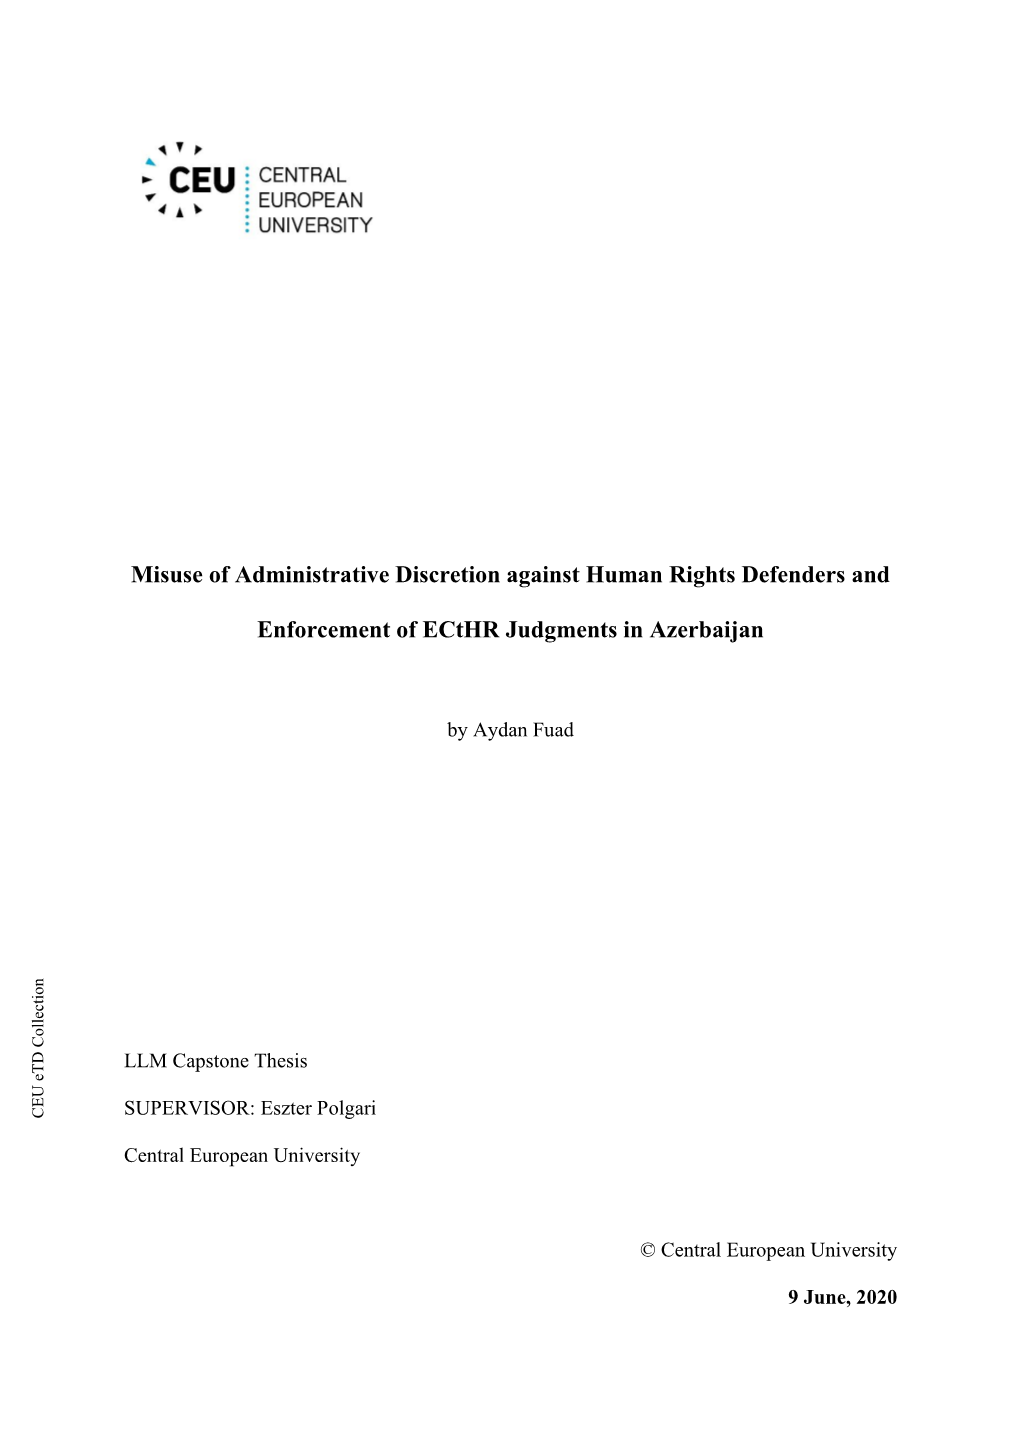 Misuse of Administrative Discretion Against Human Rights Defenders And